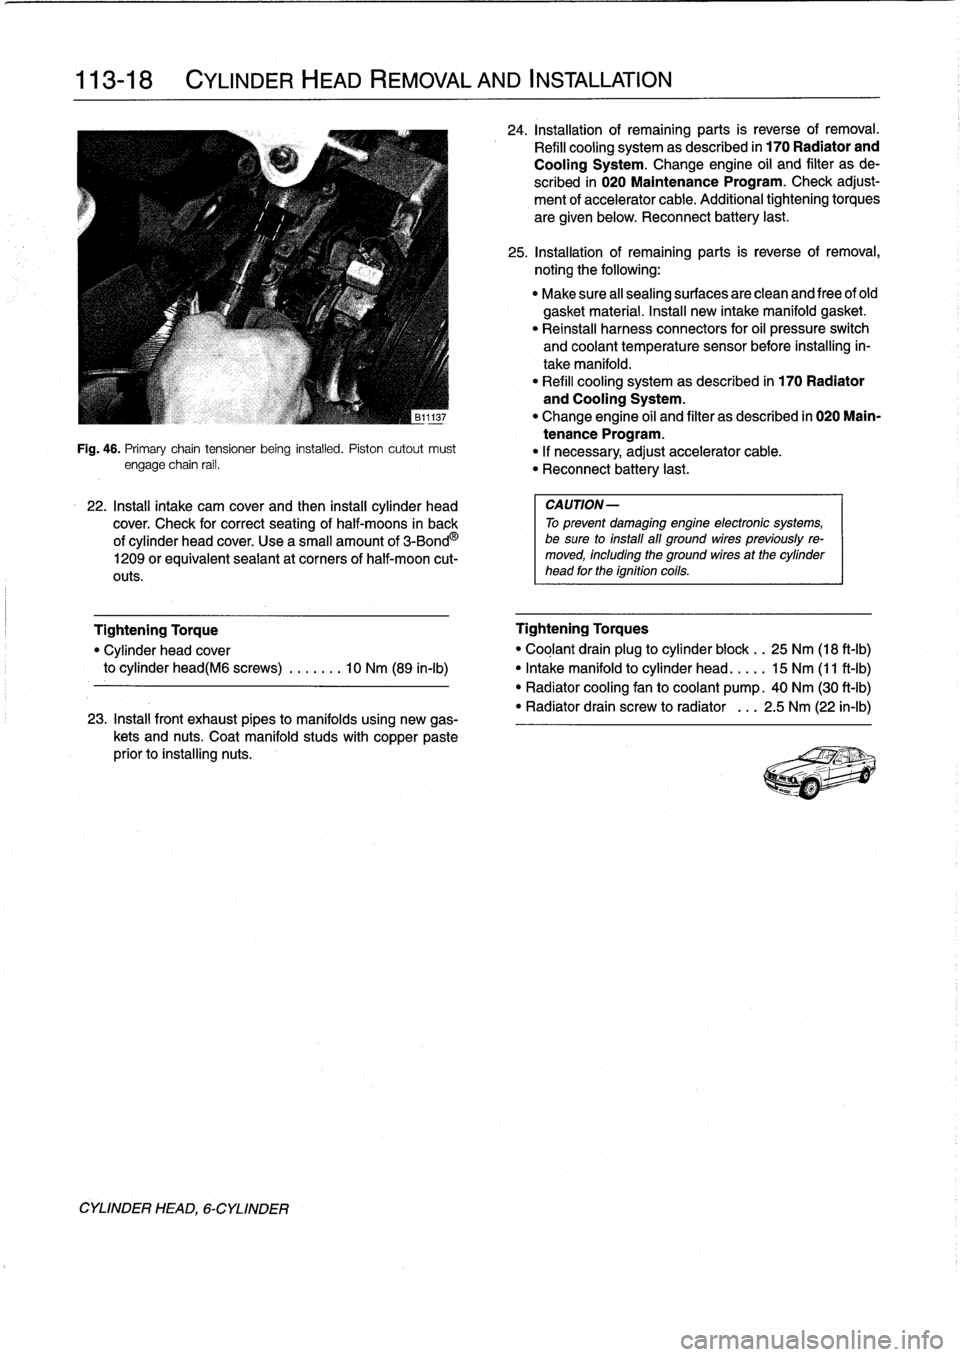 BMW 318i 1997 E36 Owners Guide 
113-
1
8

	

CYLINDER
HEAD
REMOVAL
AND
INSTALLATION

CYLINDER
HEAD,
6-CYLINDER

Fig
.
46
.
Primary
chaintensioner
being
installed
.
Piston
cutout
must
engage
chain
rail
.

22
.
Install
intake
cam
cov